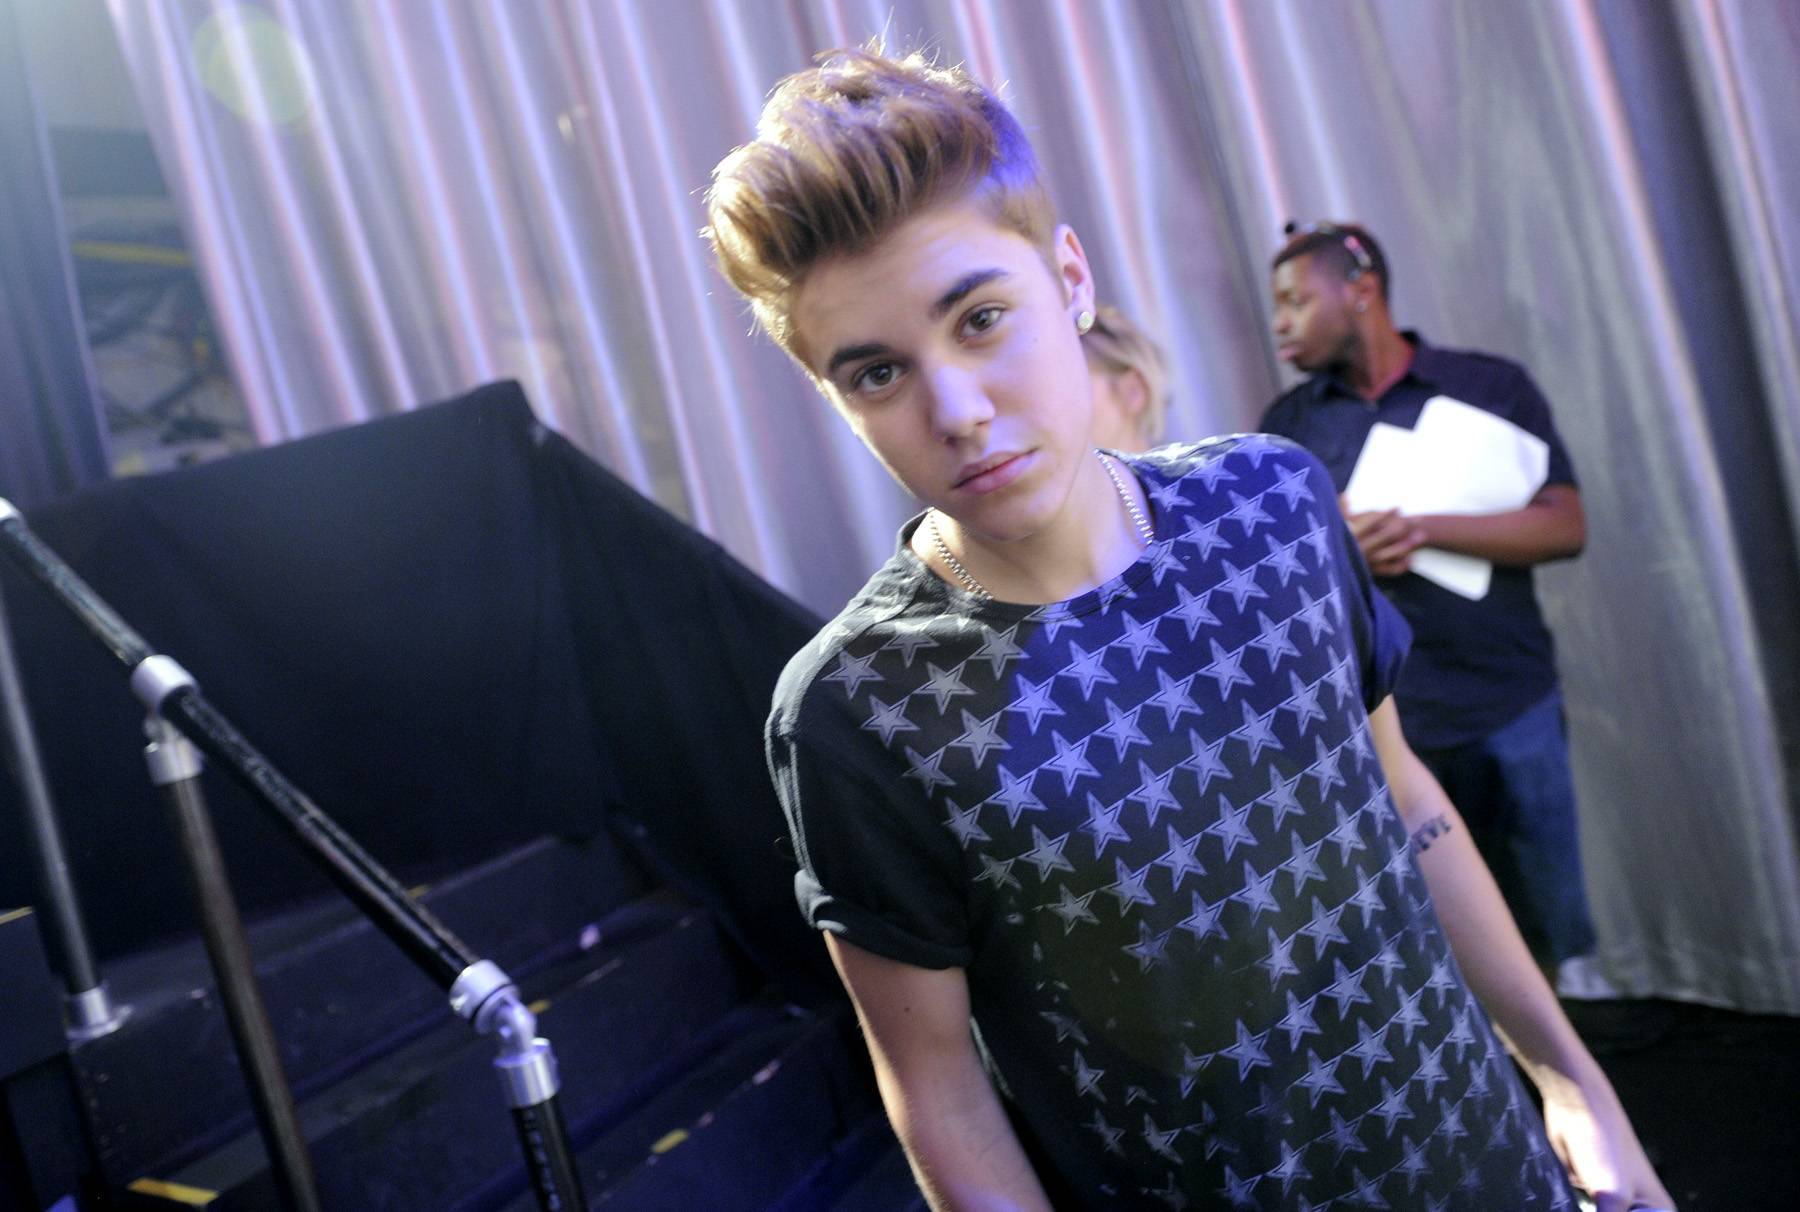 Ready For The World - Justin Beiber backstage at 106 &amp; Park, June 22, 2012. (Photo: John Ricard / BET)